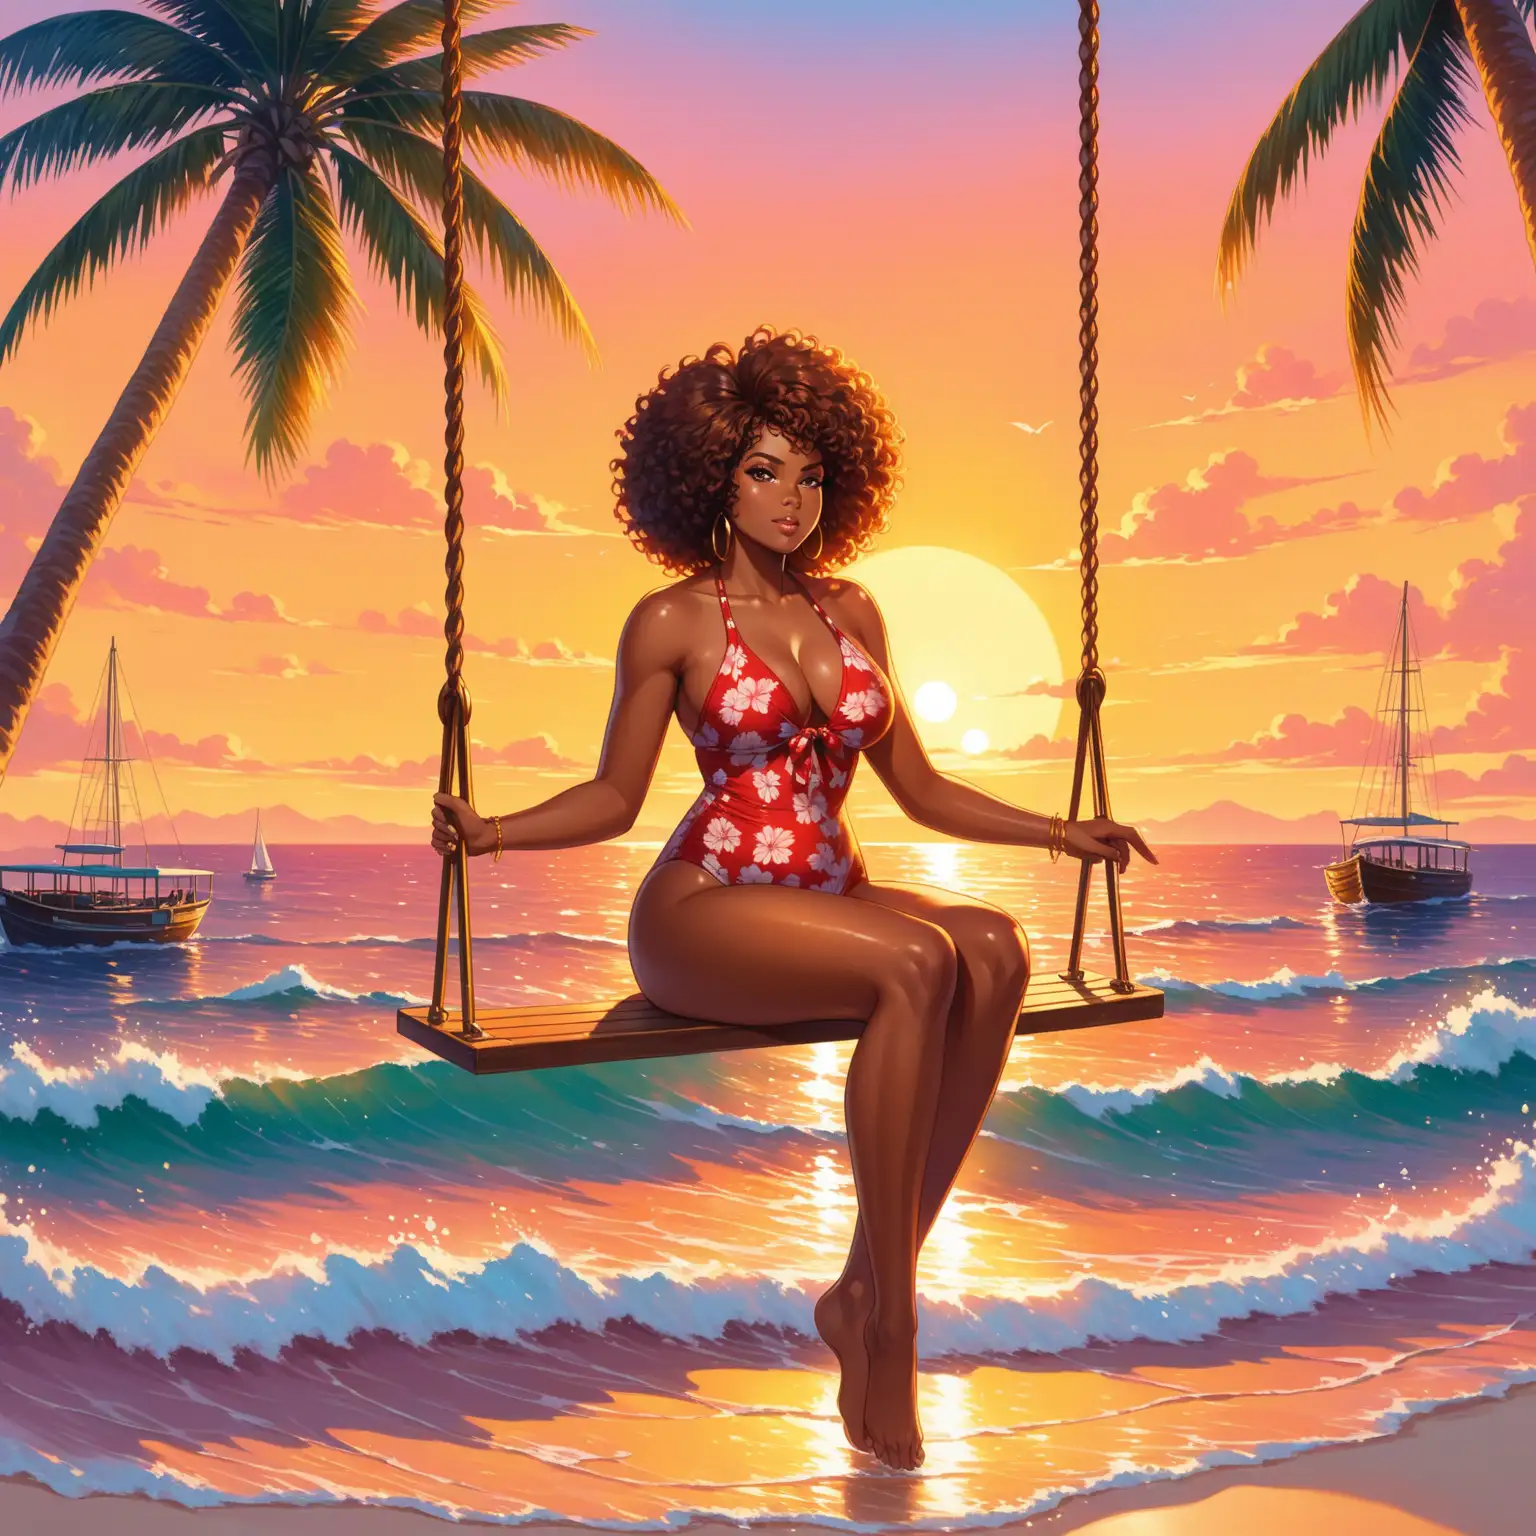 4K glossy oil painting of a regal large full figure caramel skinned African American woman with loose curly afro hairstyle. sitting in a full body view, wearing a red floral pattern swimsuit, sitting on a swing in the ocean with her barefoot touching the water. background beach, palm trees, boats, sunset.